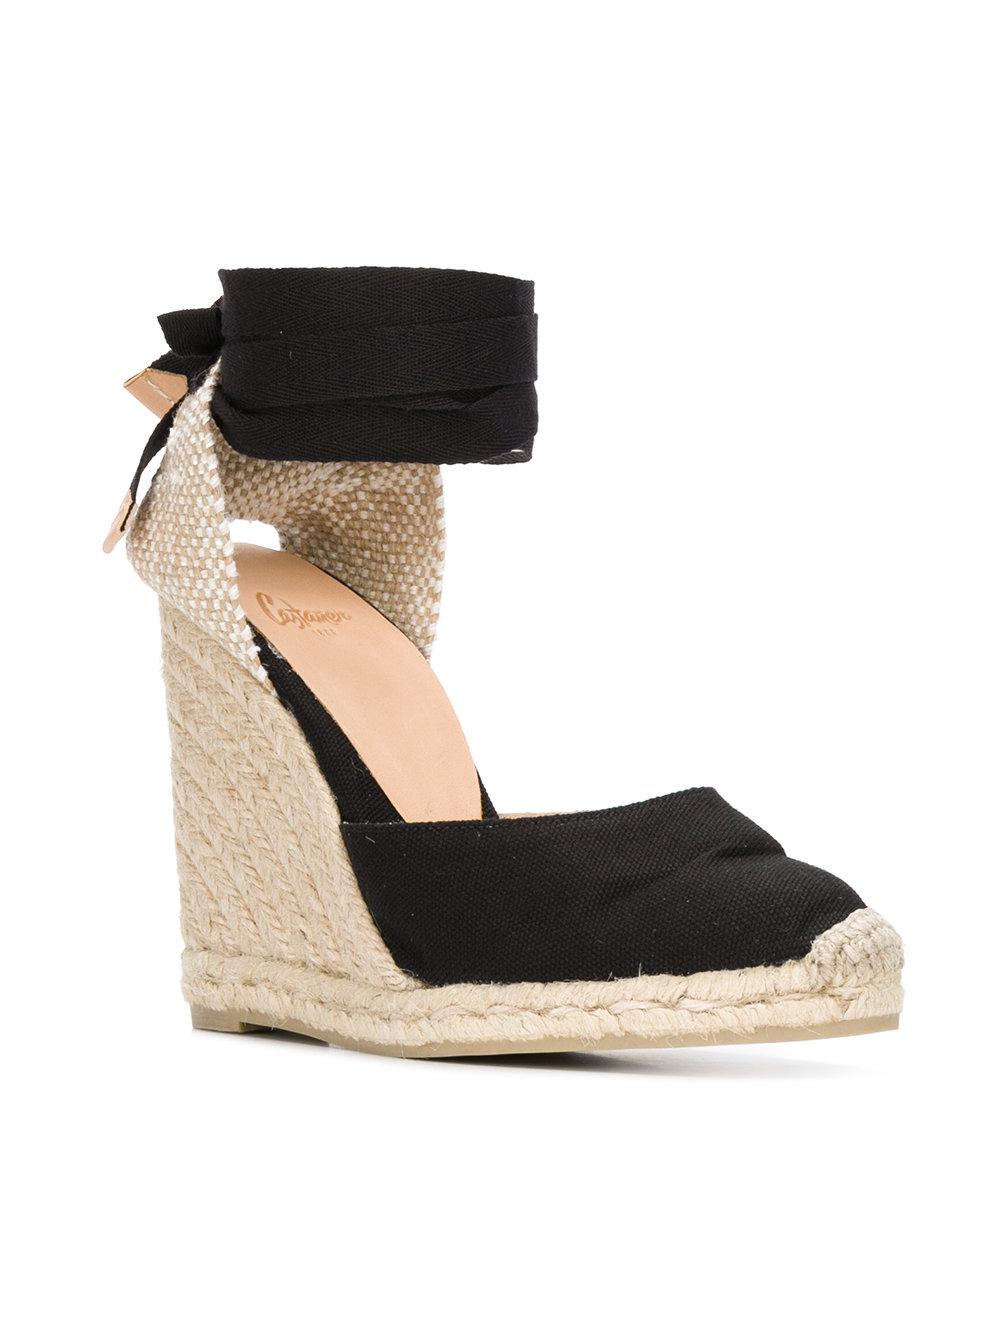 Castaner Leather Carina Wedge Espadrilles in Black - Lyst